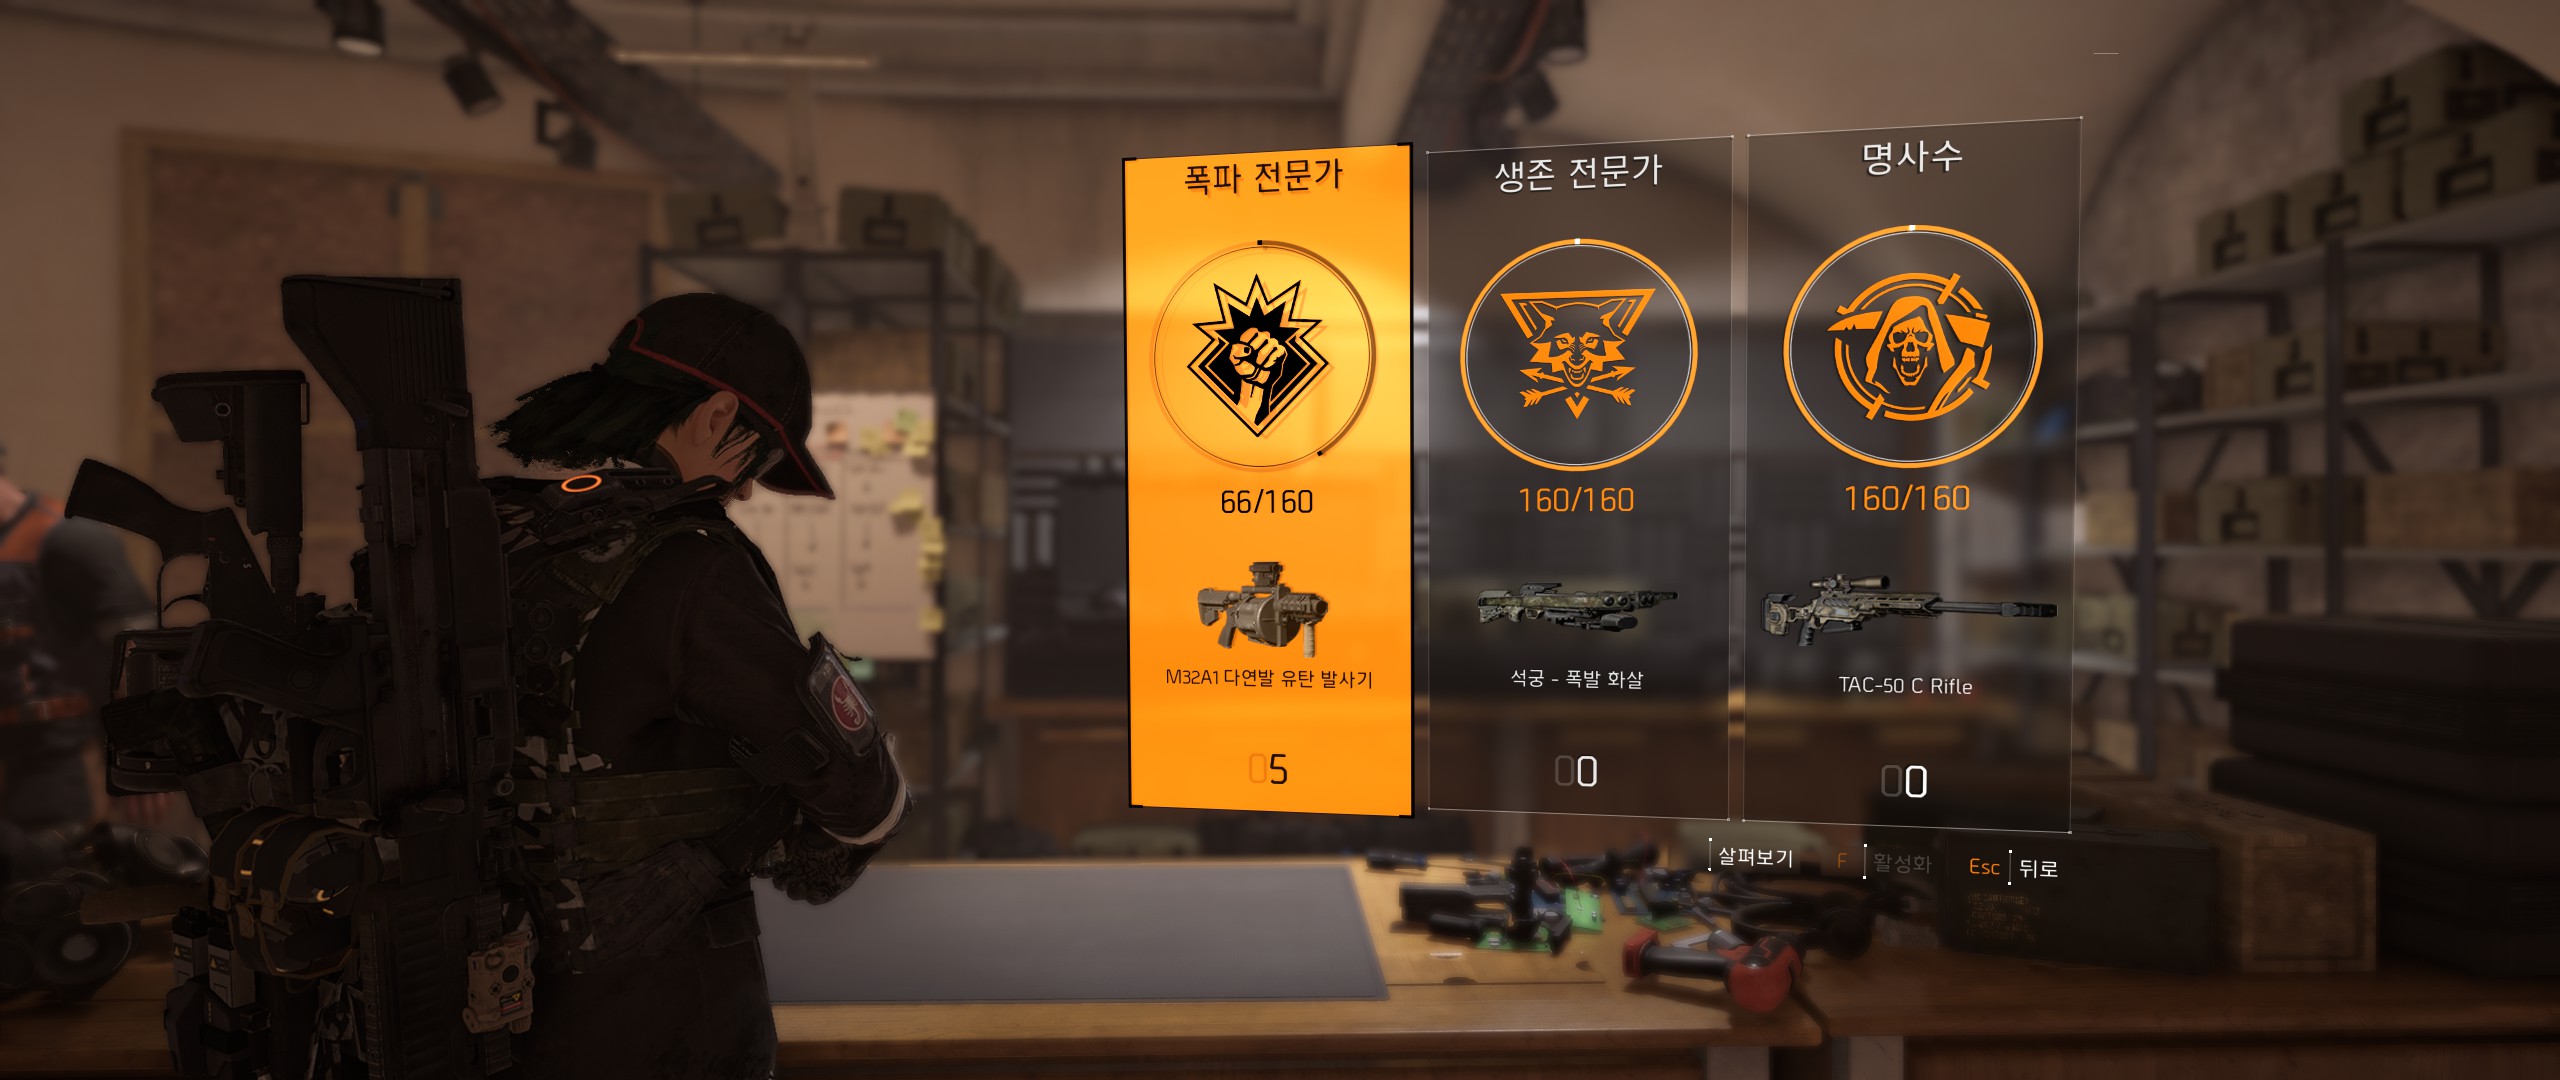 Tom Clancy's The Division® 22019-4-1-18-48-4.jpg